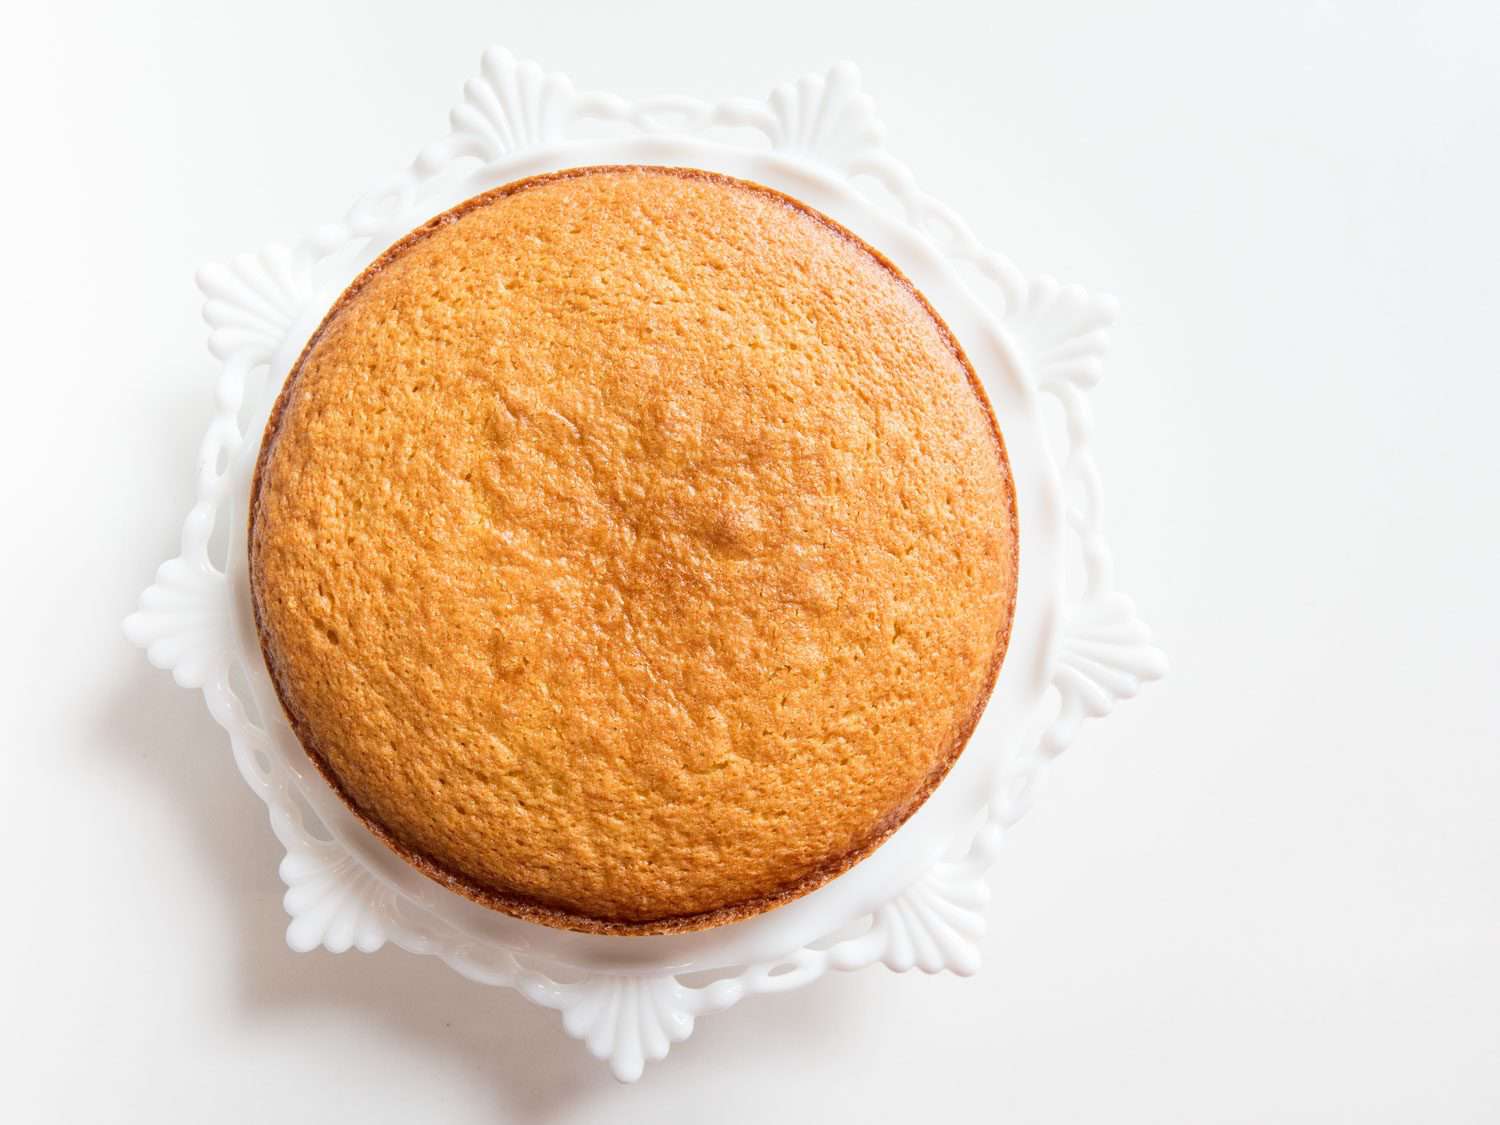 A plain, golden-brown olive oil cake on a white cake stand.